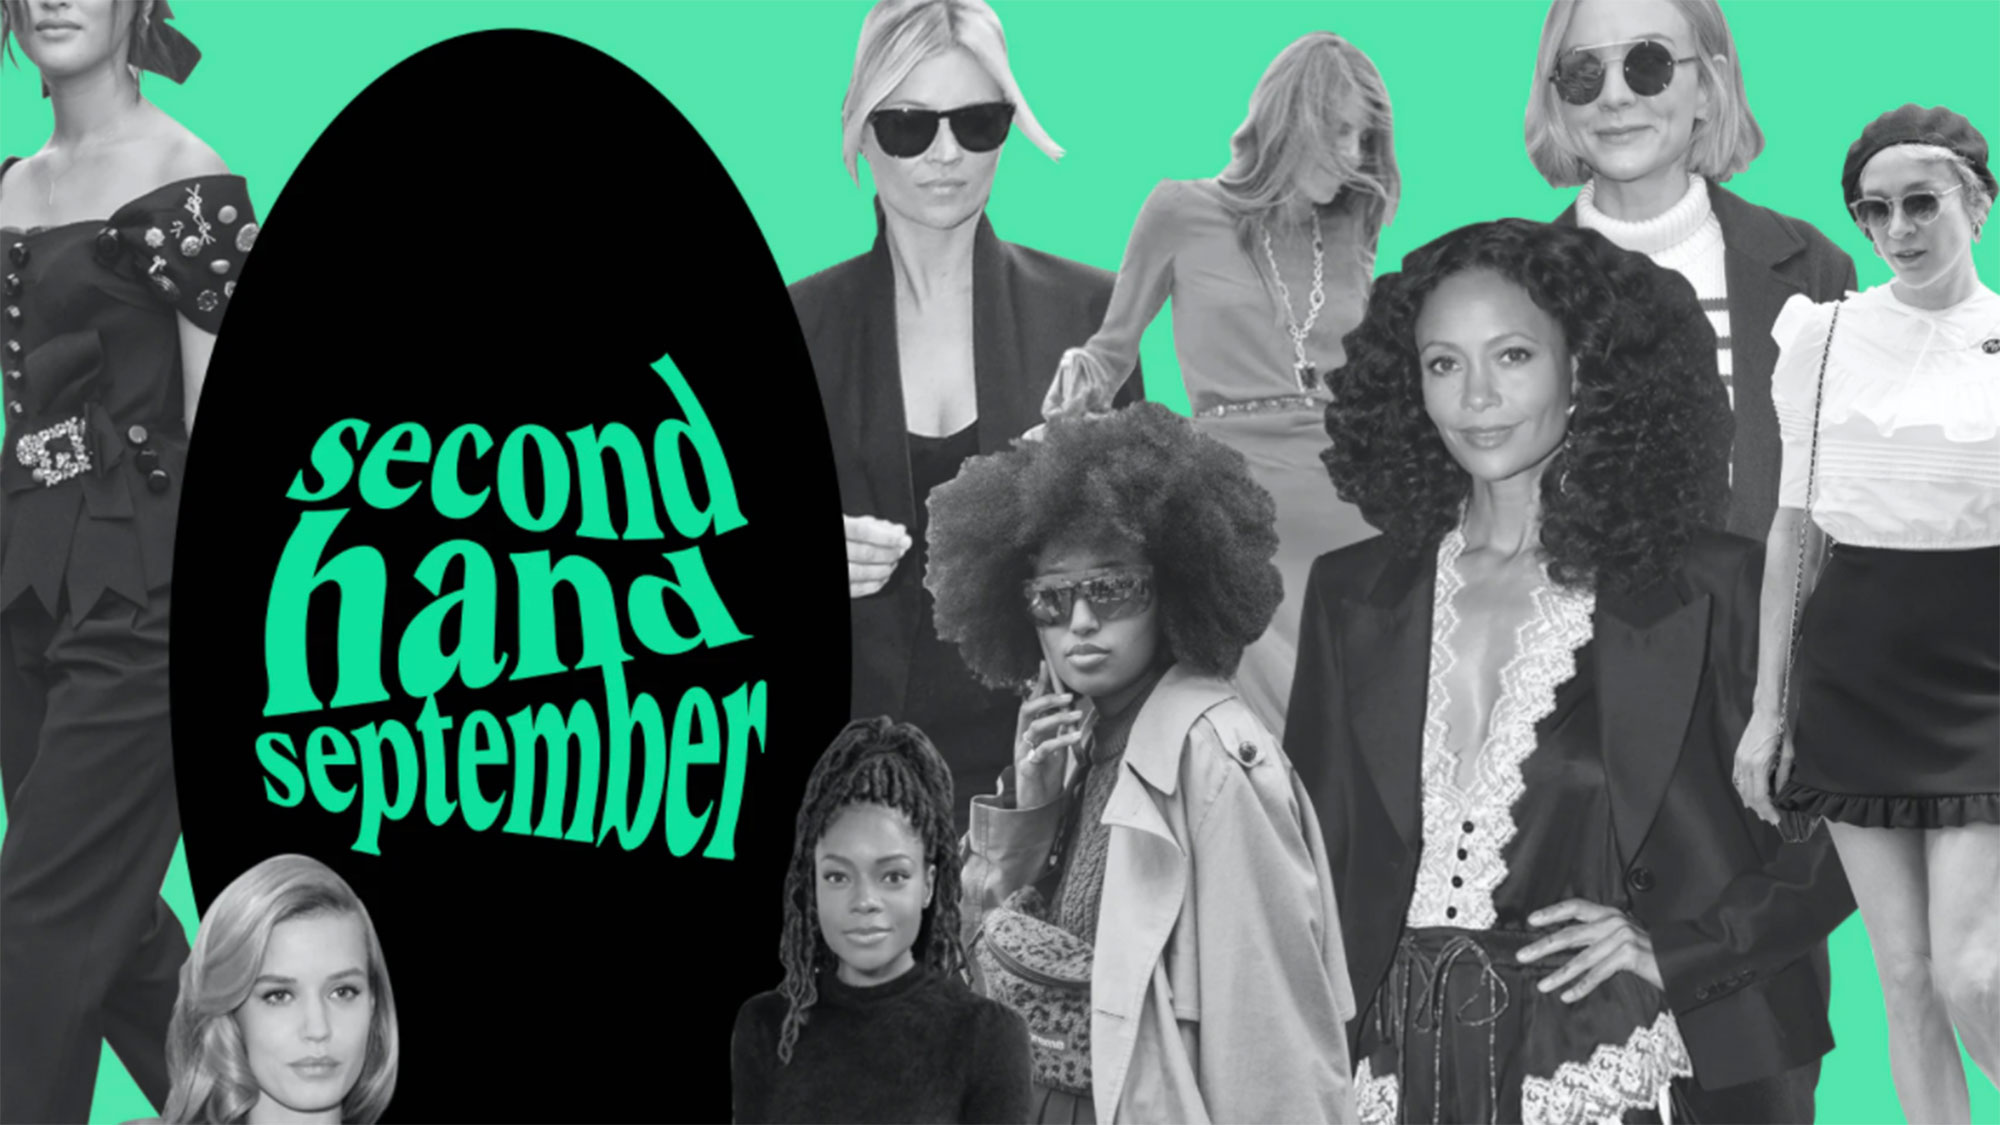 Celebrities have donated their clothes for Second Hand September (and you can buy them)